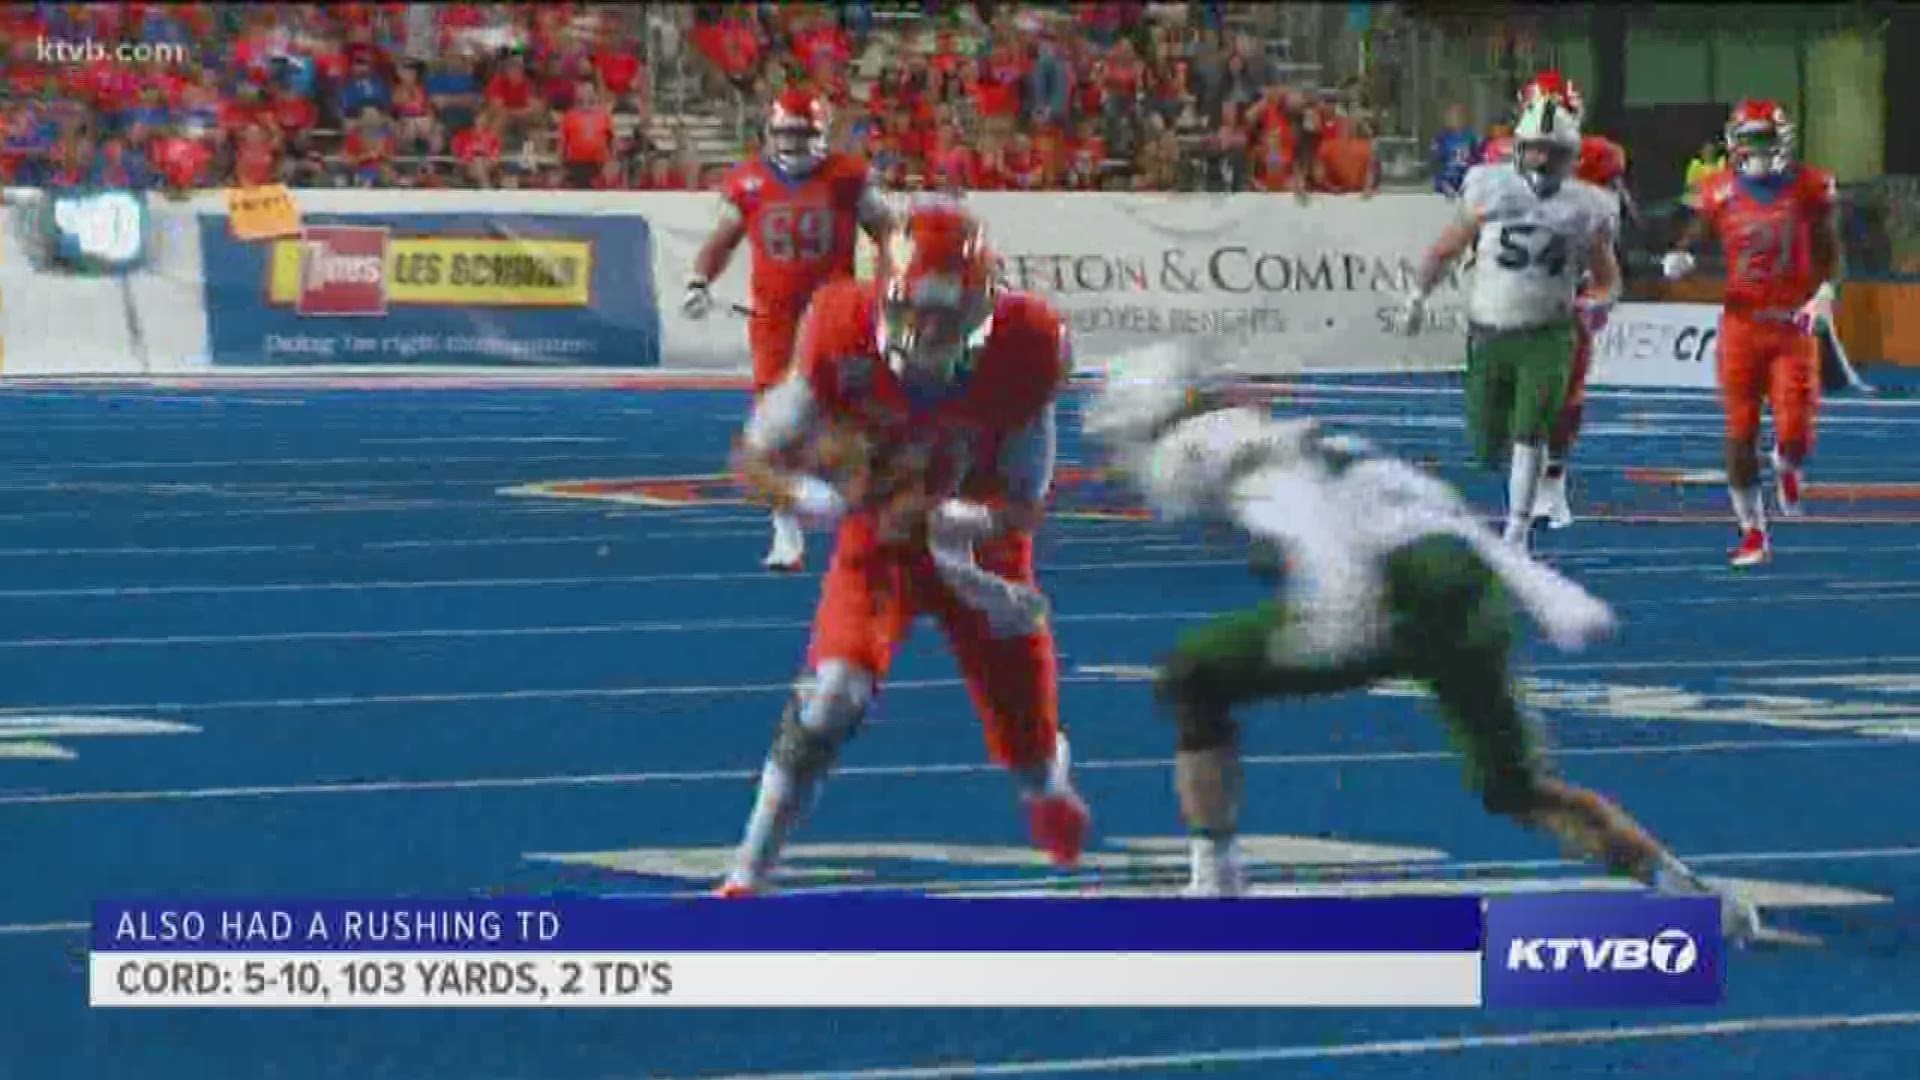 On Saturday night, Boise State dominated the Portland State Vikings 45-10. During Sunday Sports Extra, KTVB's Jay Tust, Will Hall, and Tom Scott break down all of the key storylines to come out of the game, including Chase Cord's play, the receiving corp, and Hank Bachmeier getting hit so much.